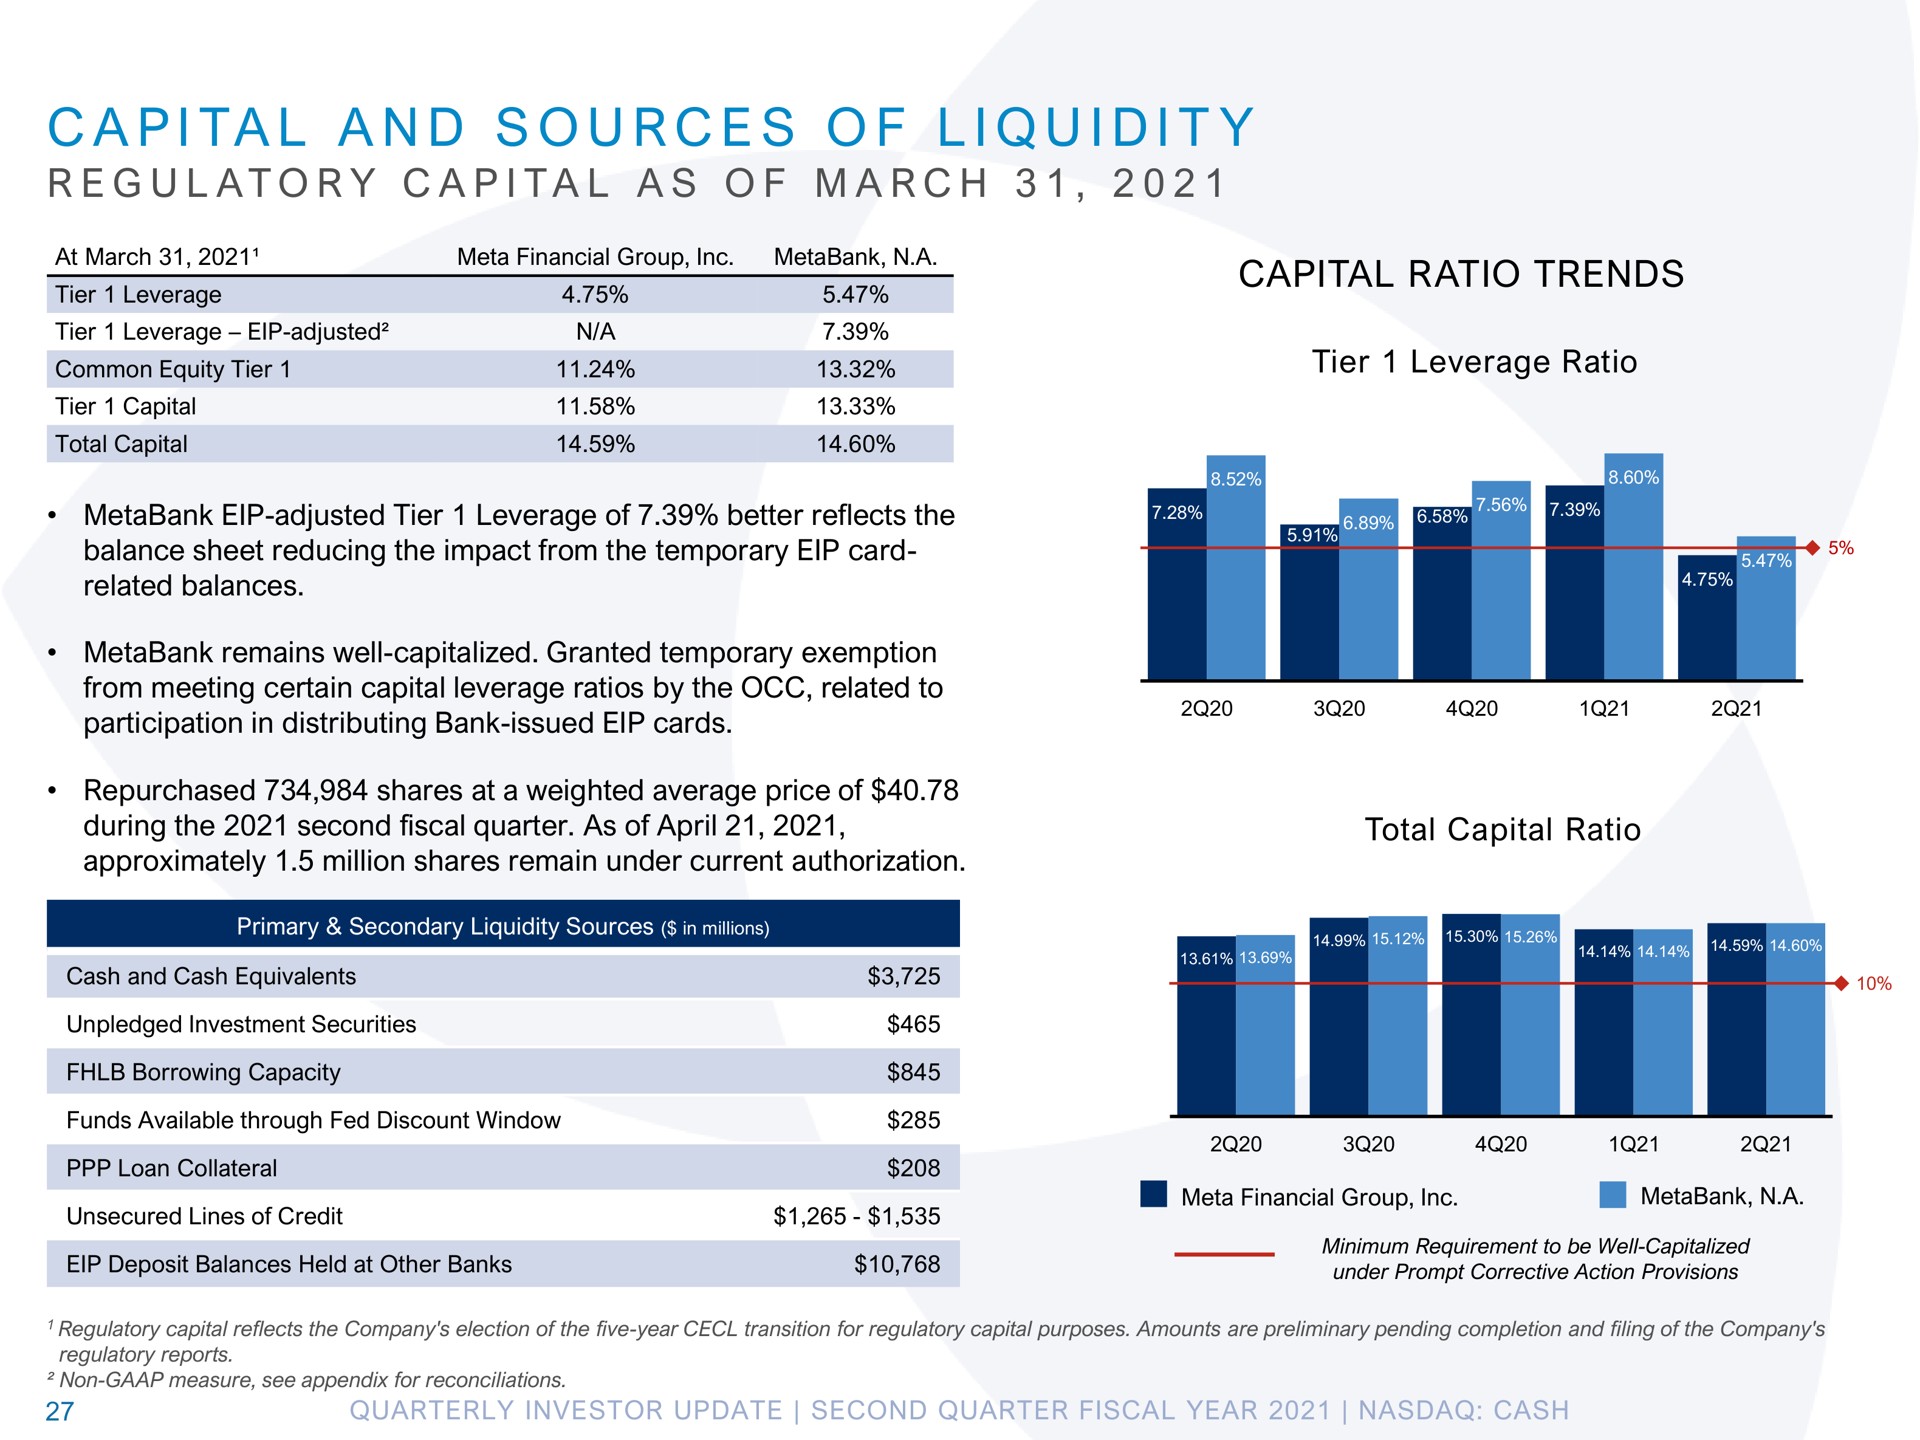 a i a i i i a a i a a a capital ratio trends and sources of liquidity regulatory as of march common equity tier tier leverage | Pathward Financial